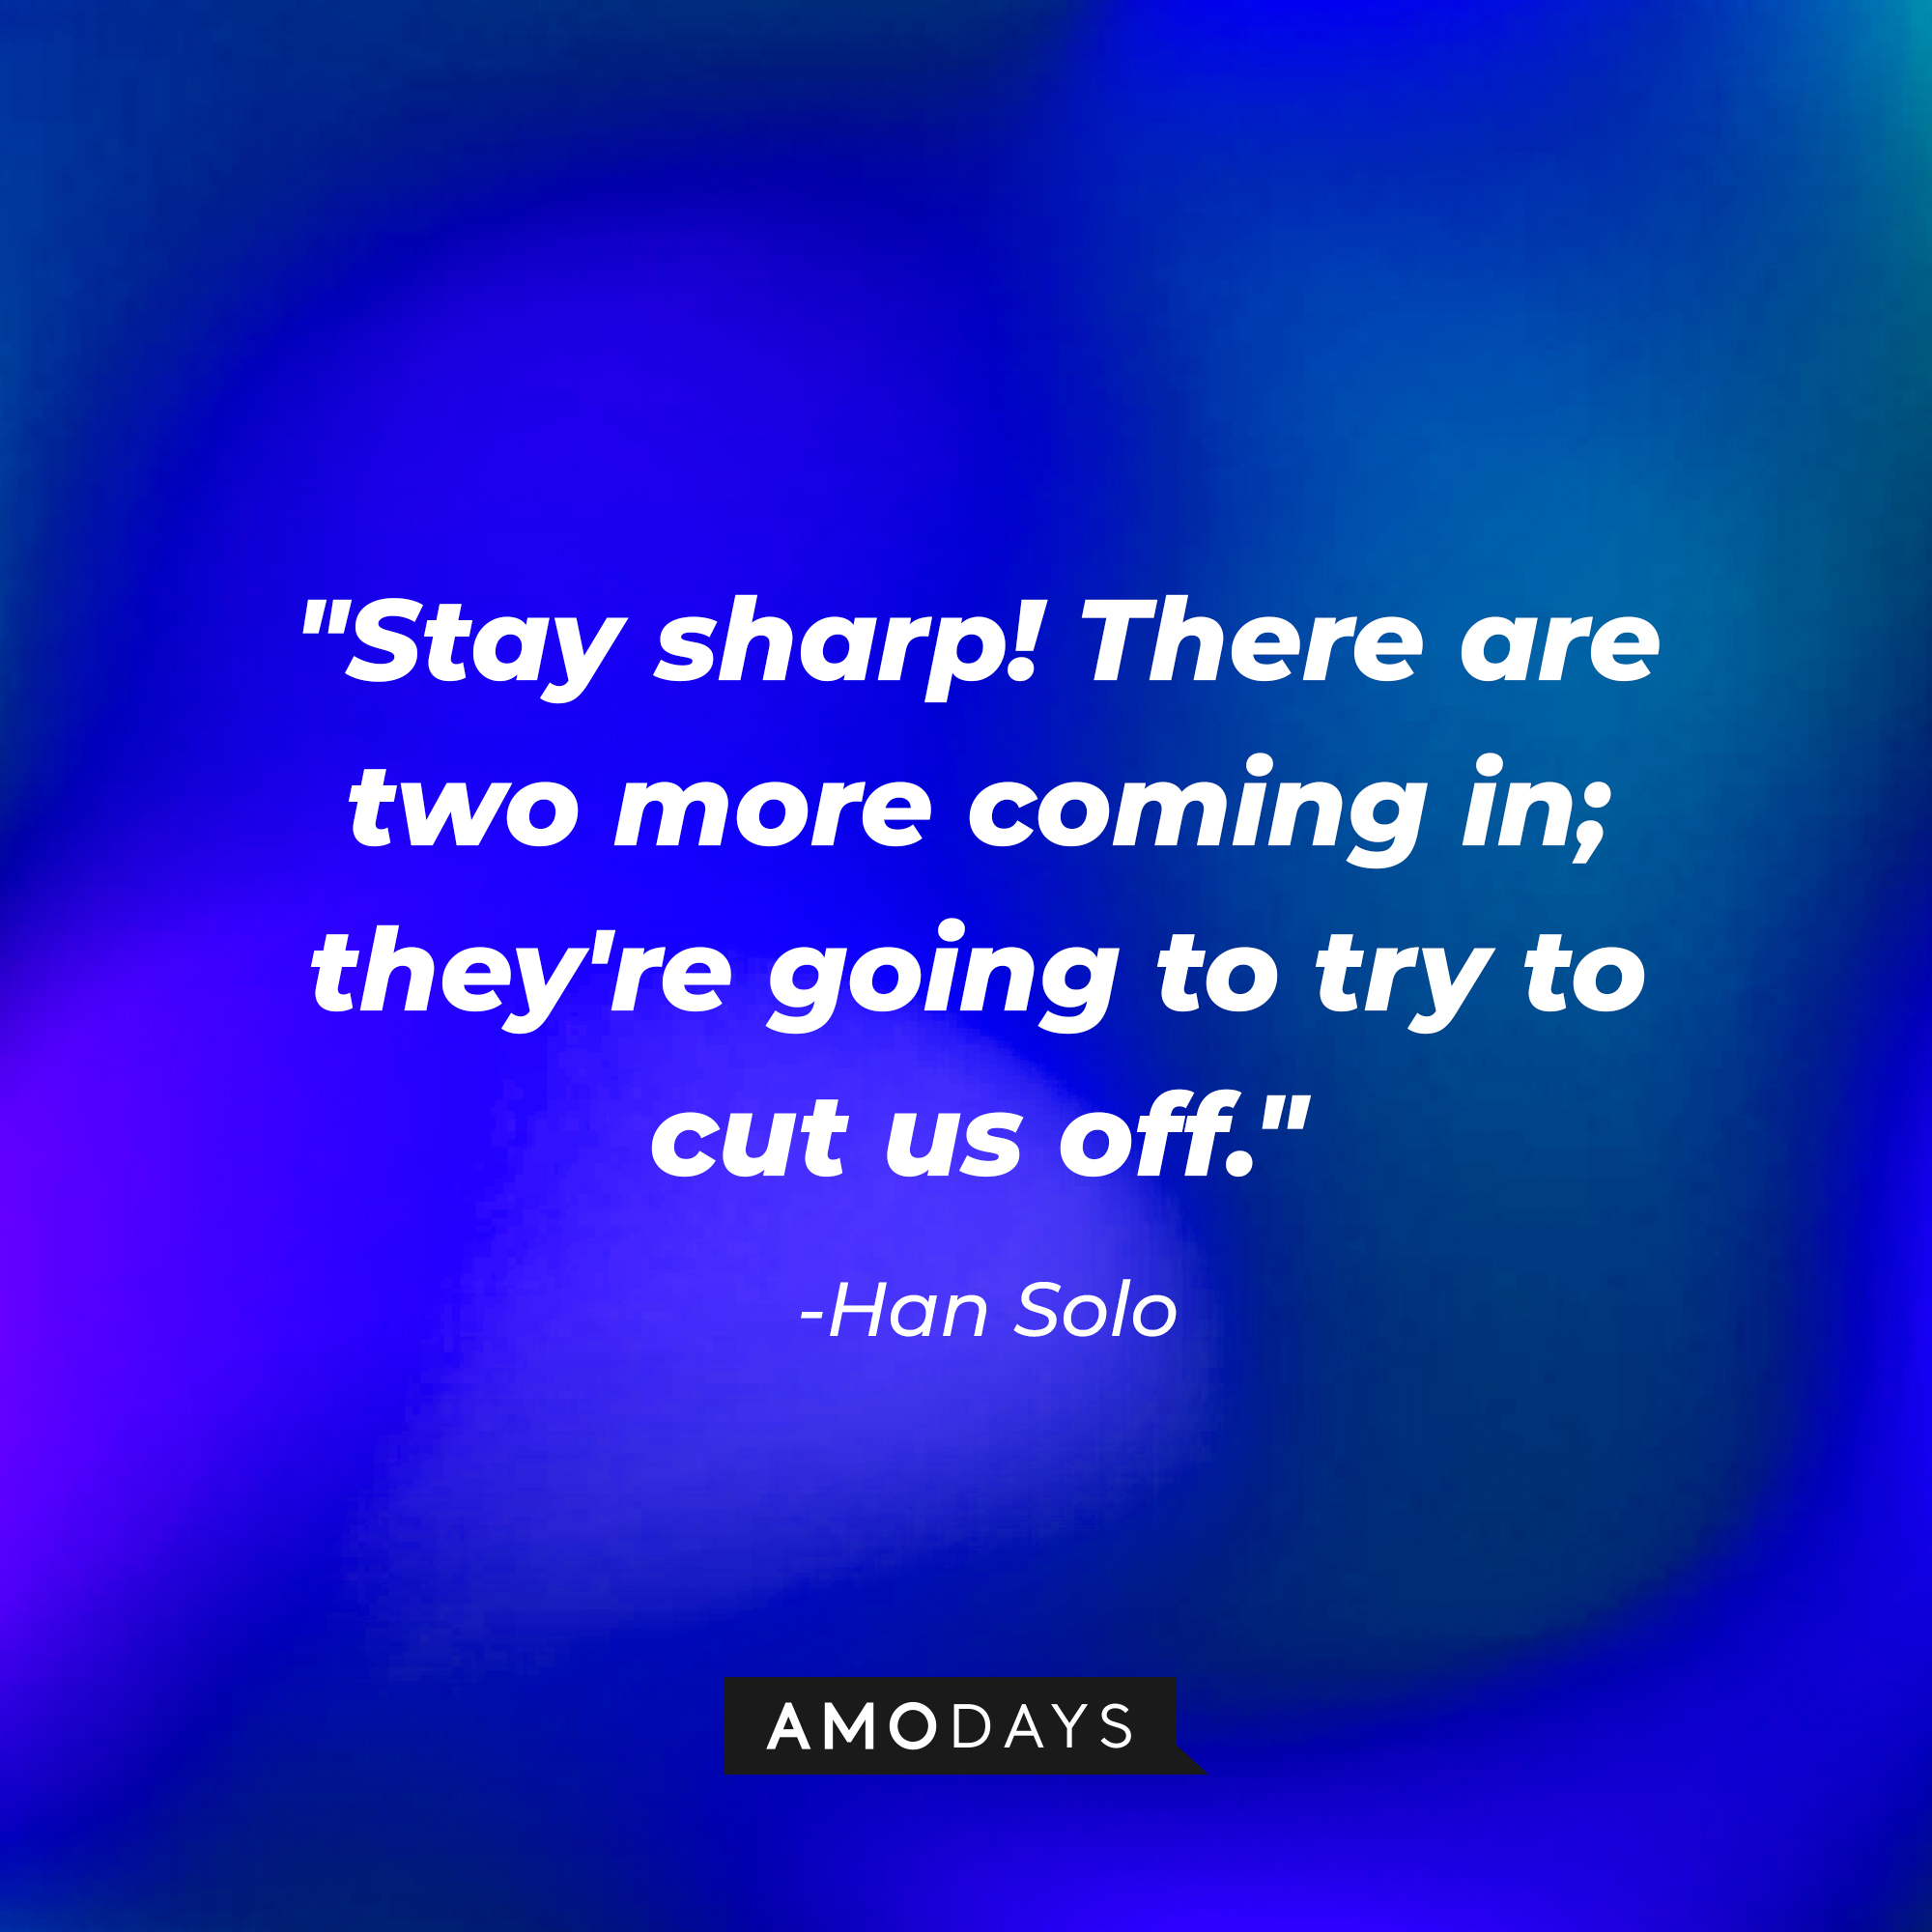 Han Solo’s quote: "Stay sharp! There are two more coming in; they're going to try to cut us off." | Source: AmoDays